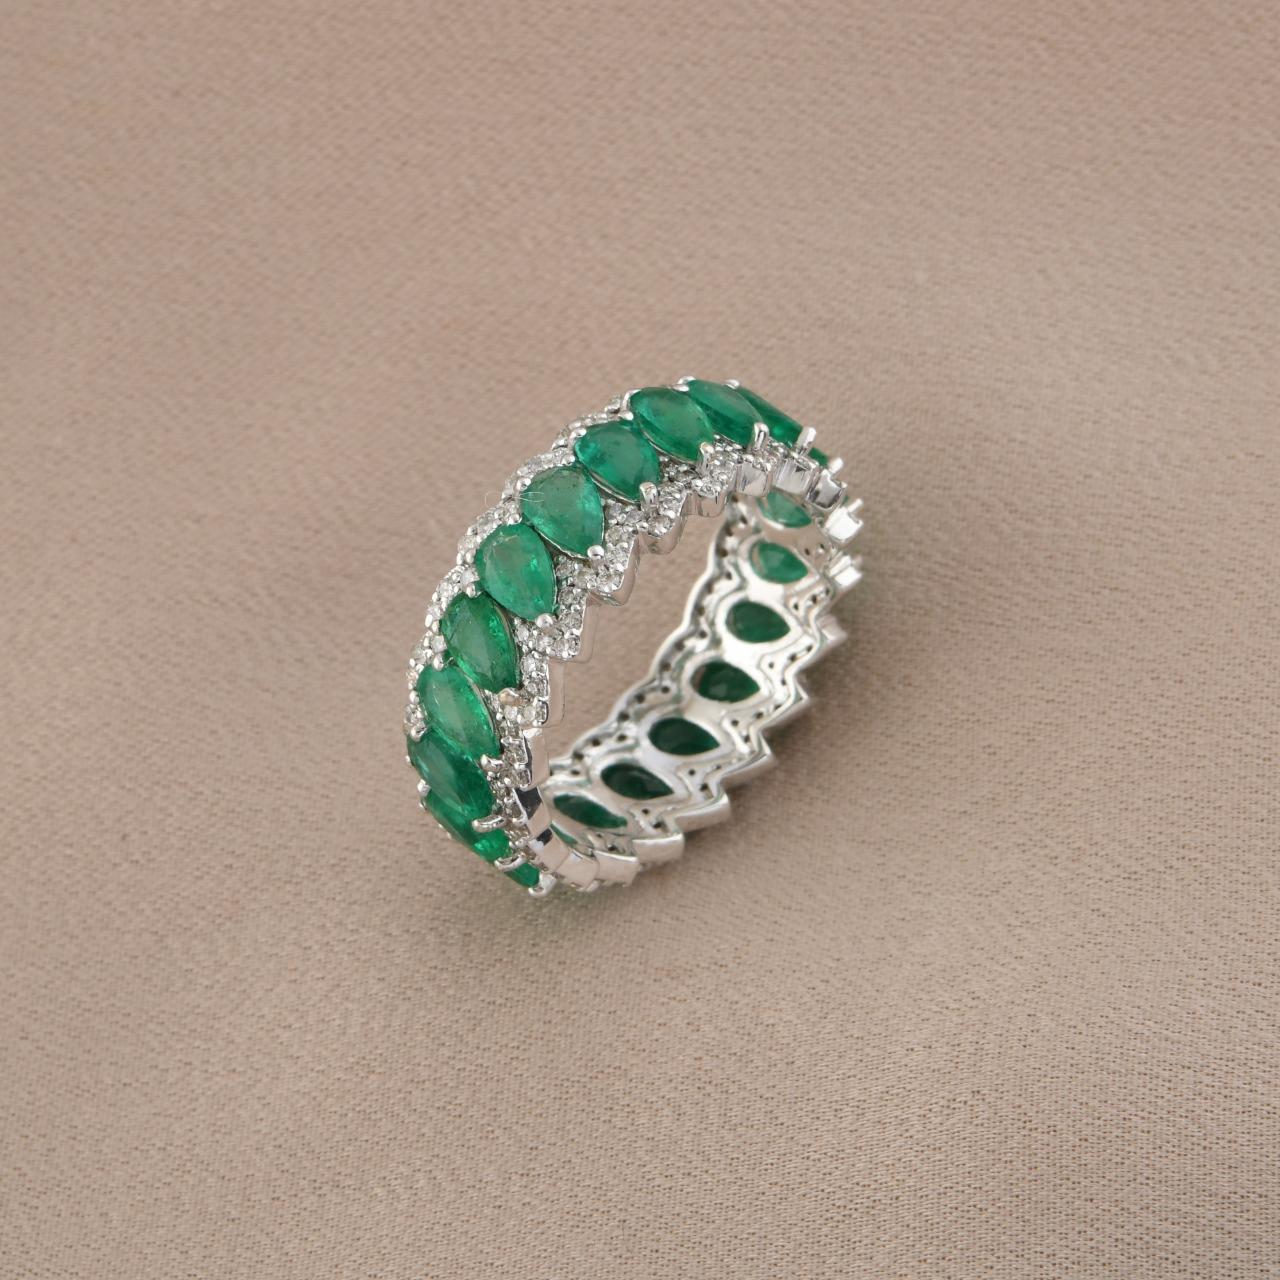 Eternity band in 18k gold with pear cut emeralds and round brilliant cut diamonds 💎, about total ct 4,50.  
Emeralds pear cut ct 4 from Zambia.
Diamonds ct 0,50 G-H/VS-SI.
Current size 54.

Note: on my shipment, customers not pay taxes.